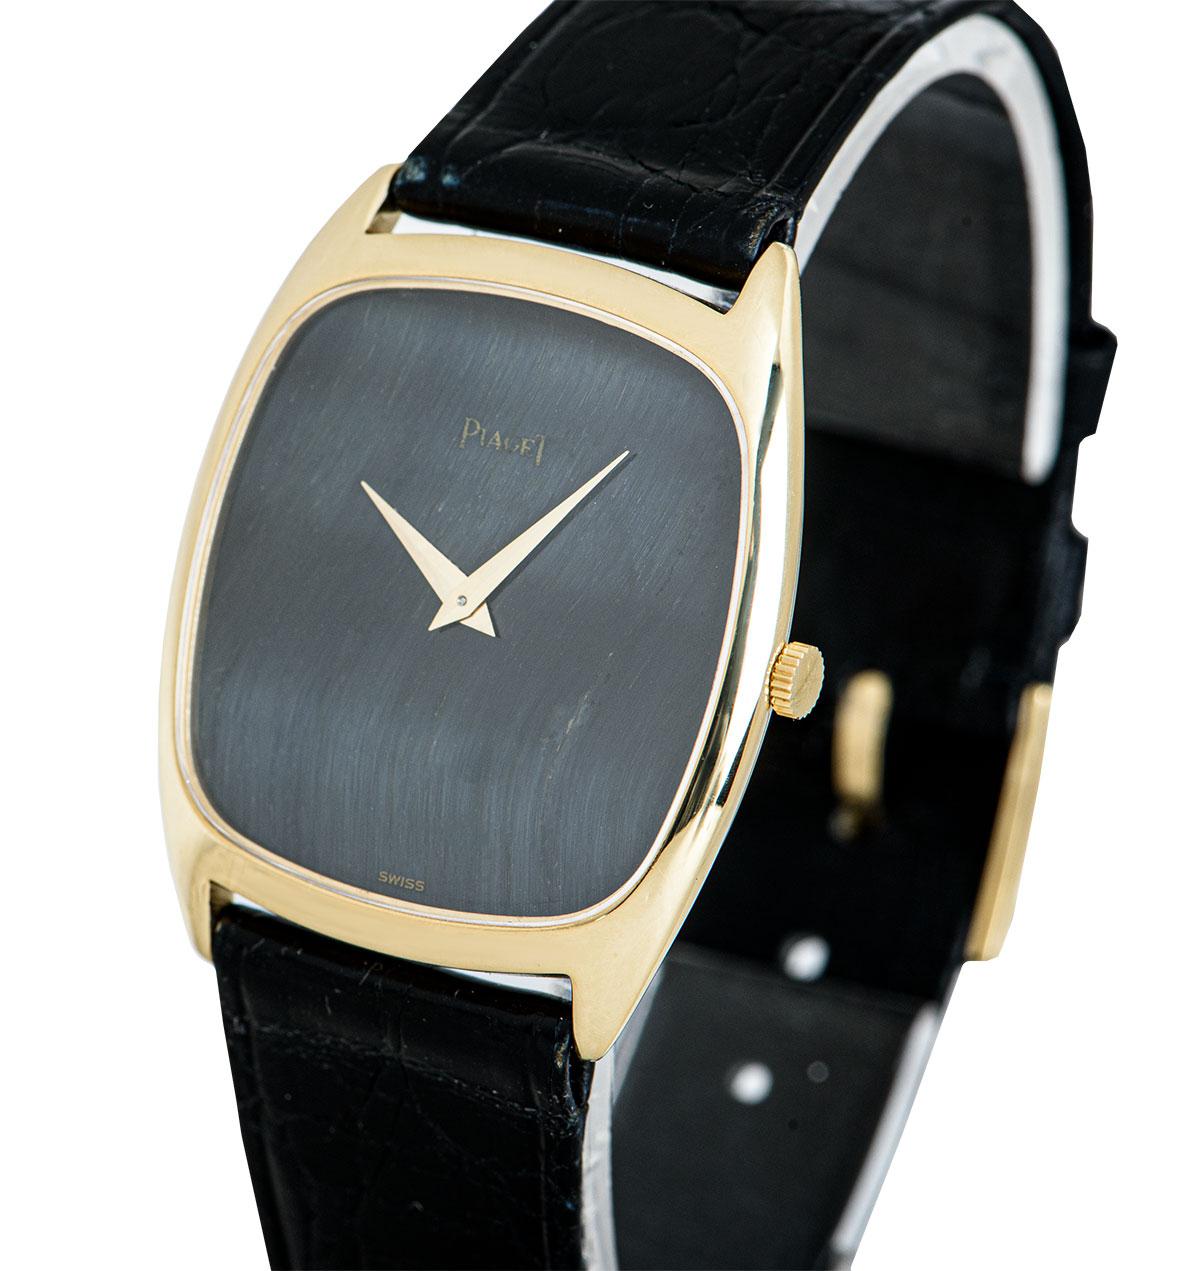 A 29 mm 18k Yellow Gold Gents Dress Wristwatch, stone dial, a fixed 18k yellow gold bezel, an original black leather strap with an original 18k yellow gold pin buckle, sapphire glass, manual wind movement, in excellent condition, comes with a Piaget